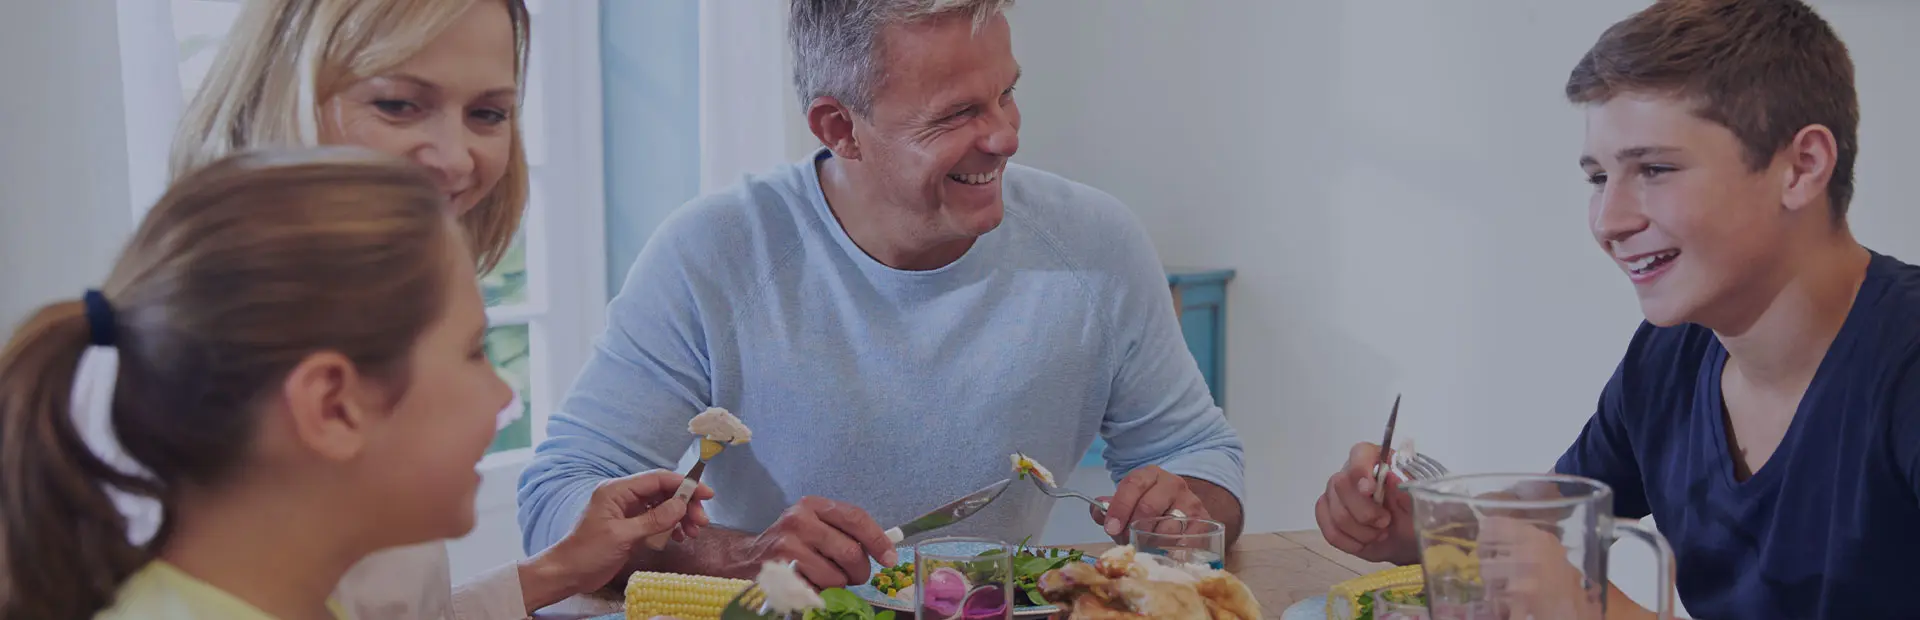 A family sit around the table eating dinner, the father has dentures but is smiling confidently and eating meat and corn on the cob, as he knows about the benefits of denture adhesive cream.  